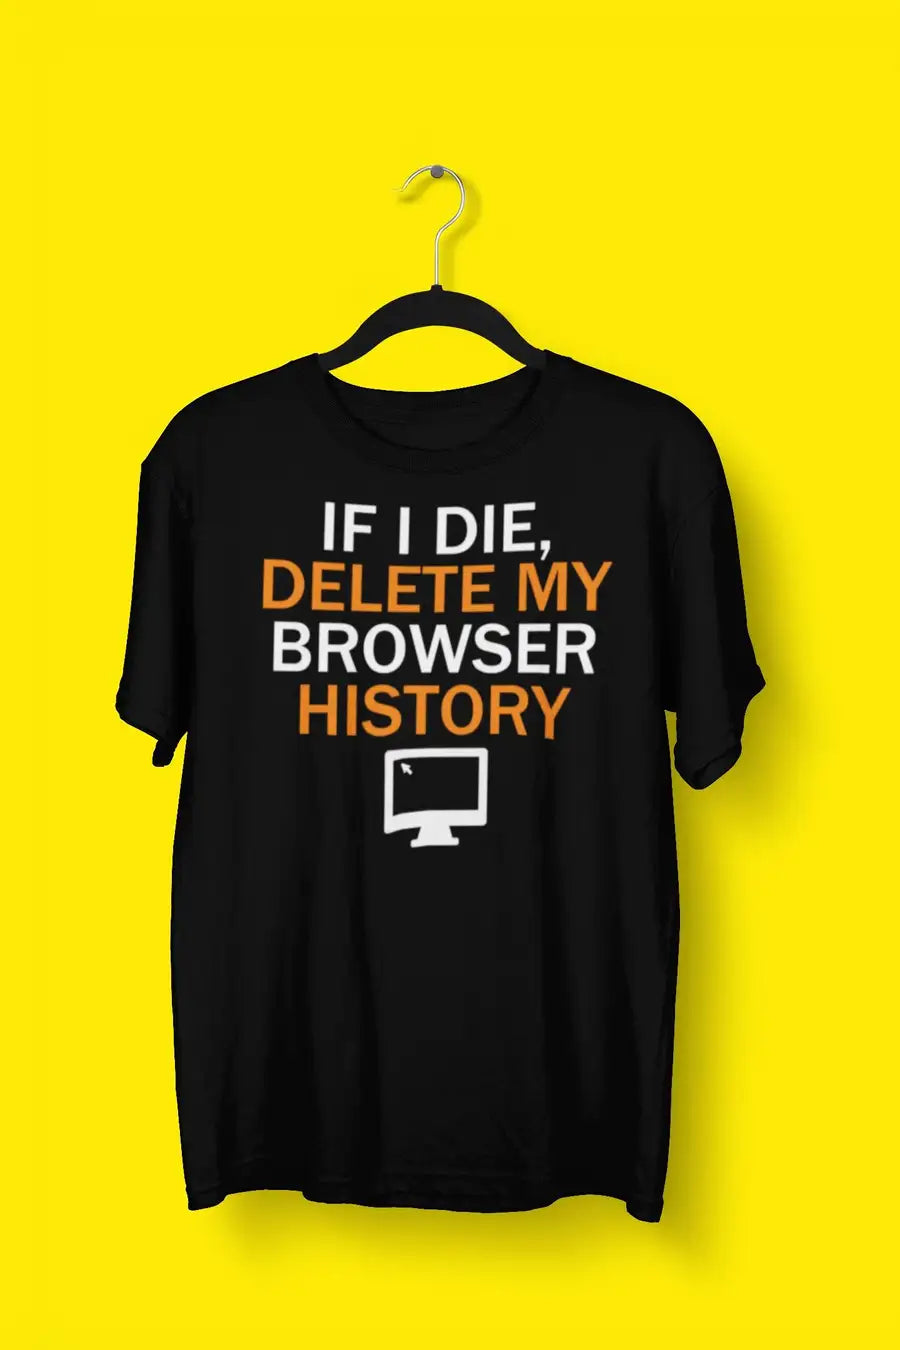 Delete My Browser History T Shirt for Men | Premium Design | Catch My Drift India - Catch My Drift India Clothing black, clothing, engineer, engineering, funny, general, made in india, multi 